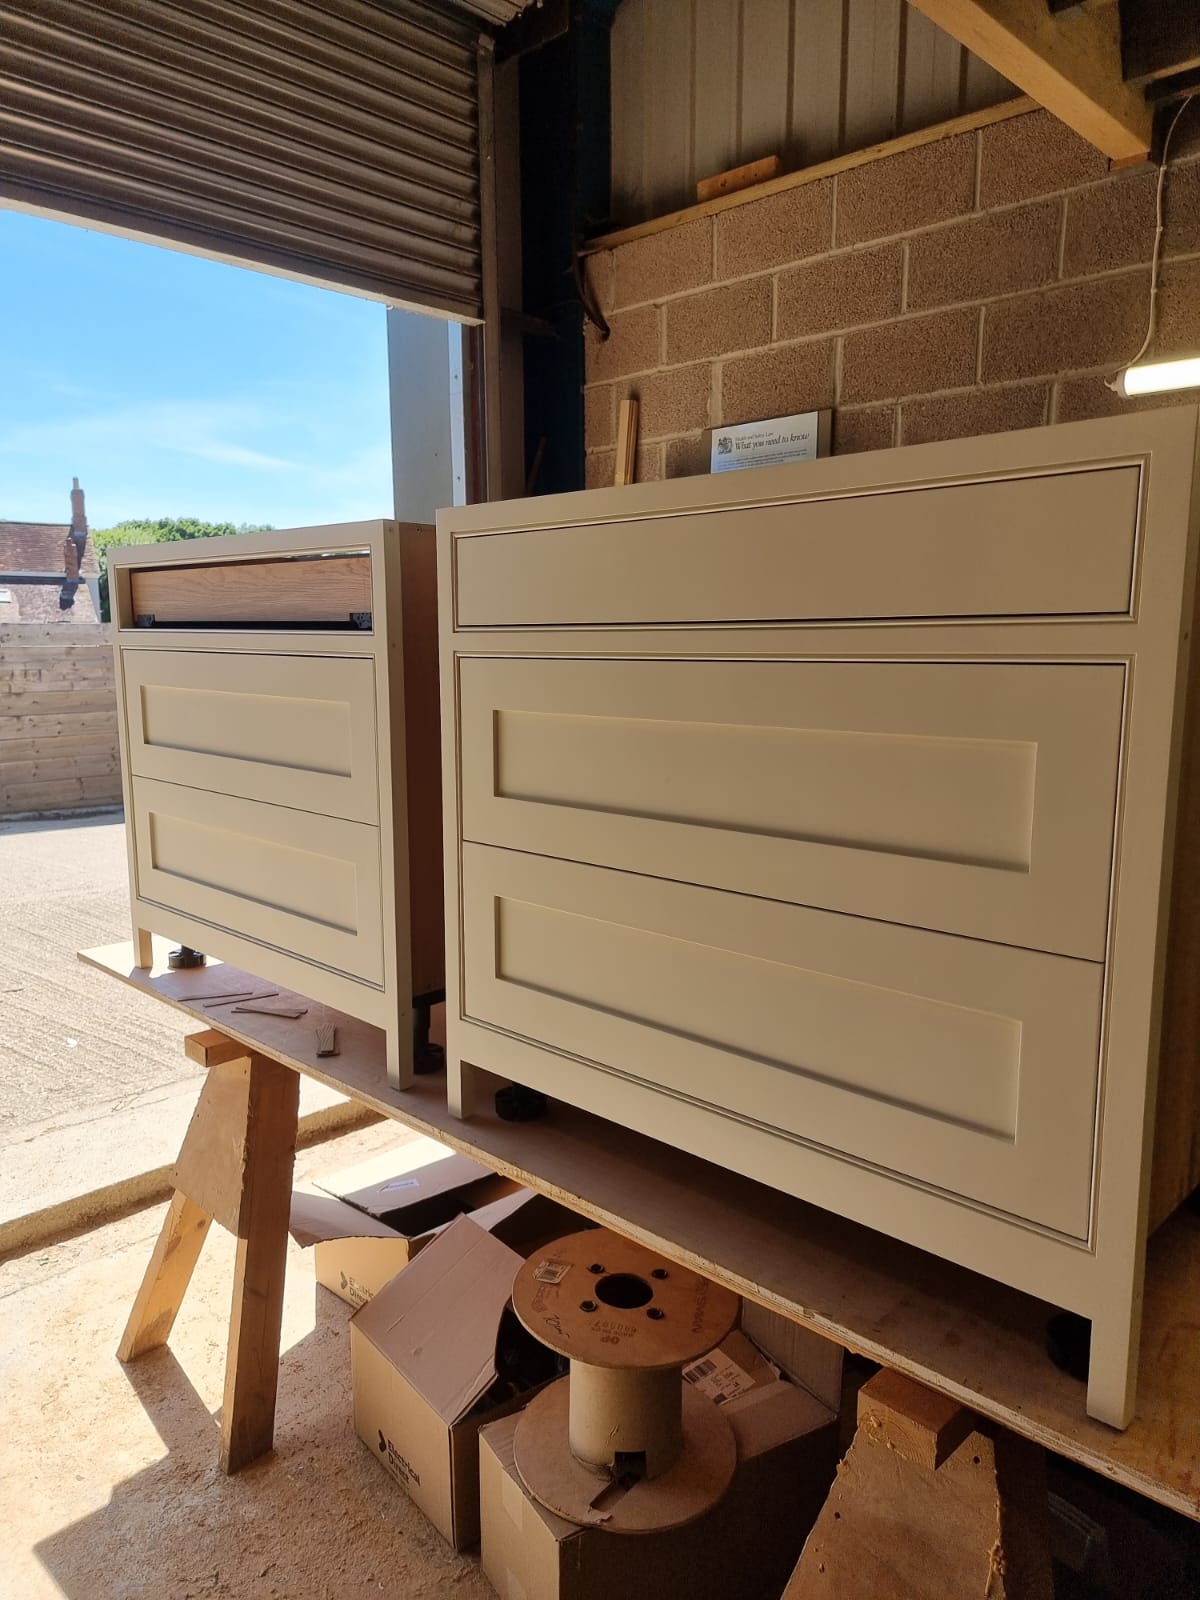 Timber storage units by Kings Stag Joinery